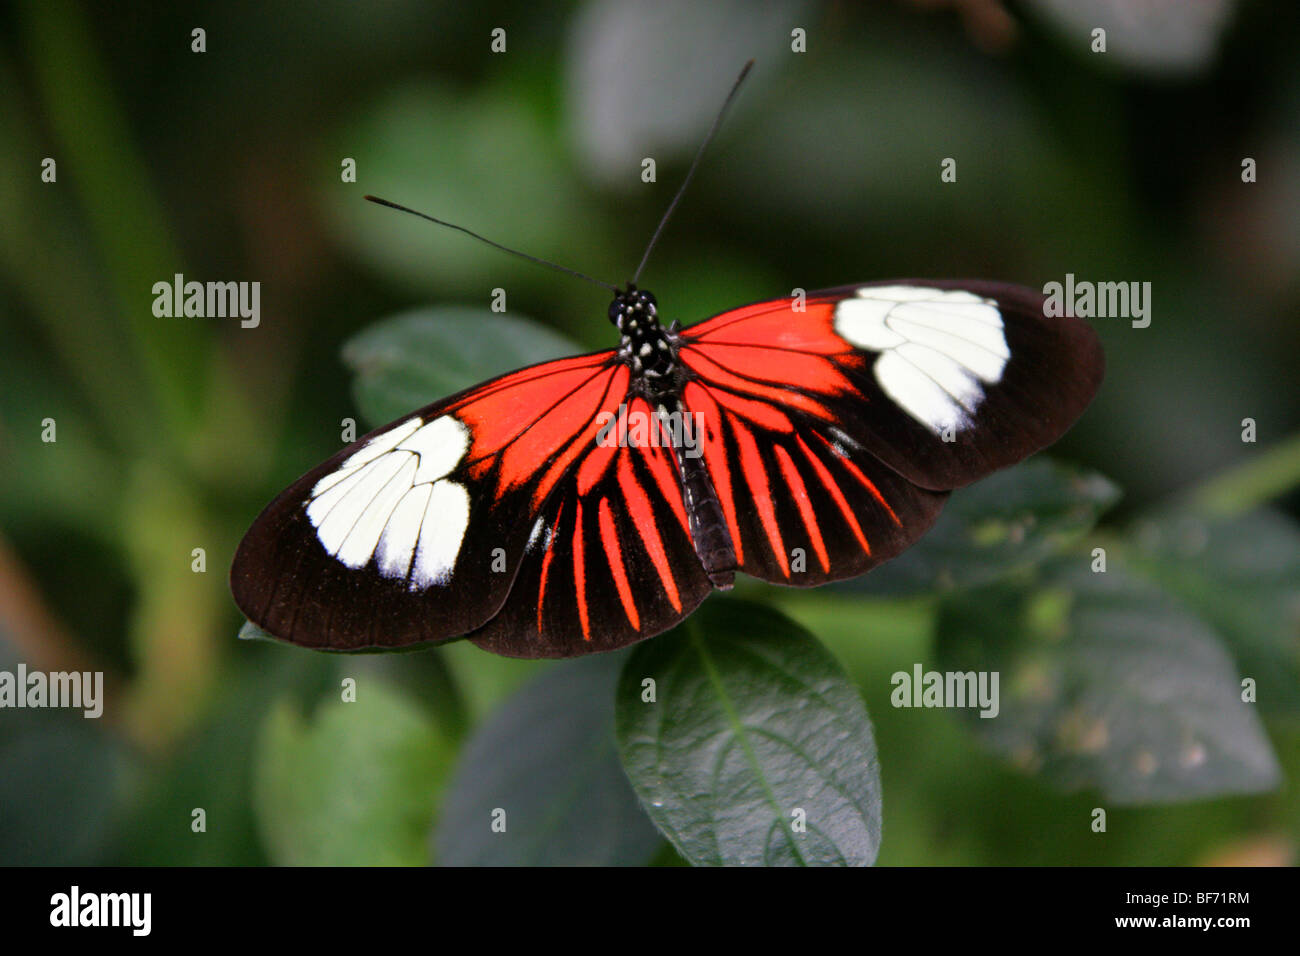 Postman Butterfly, Heliconius melpomene, Nymphalidae, South America Stock Photo